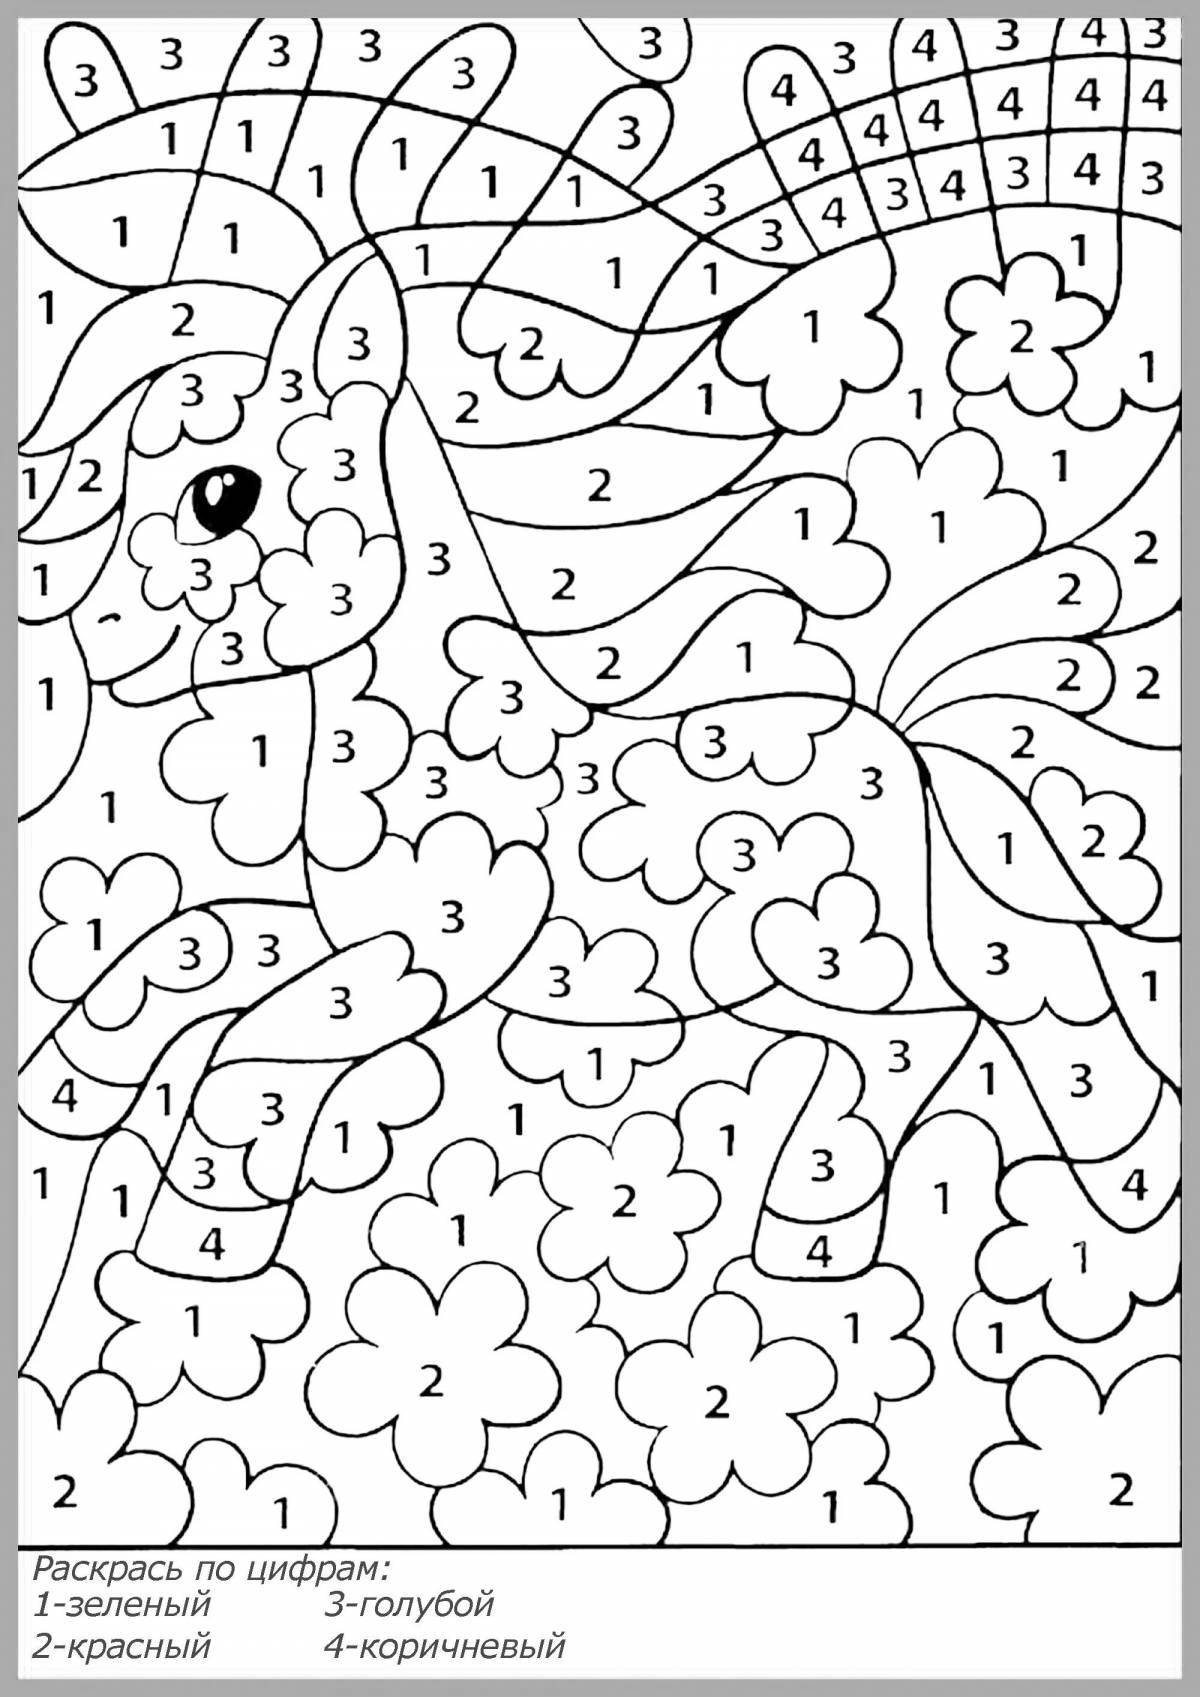 Stimulating coloring book for 6 year olds